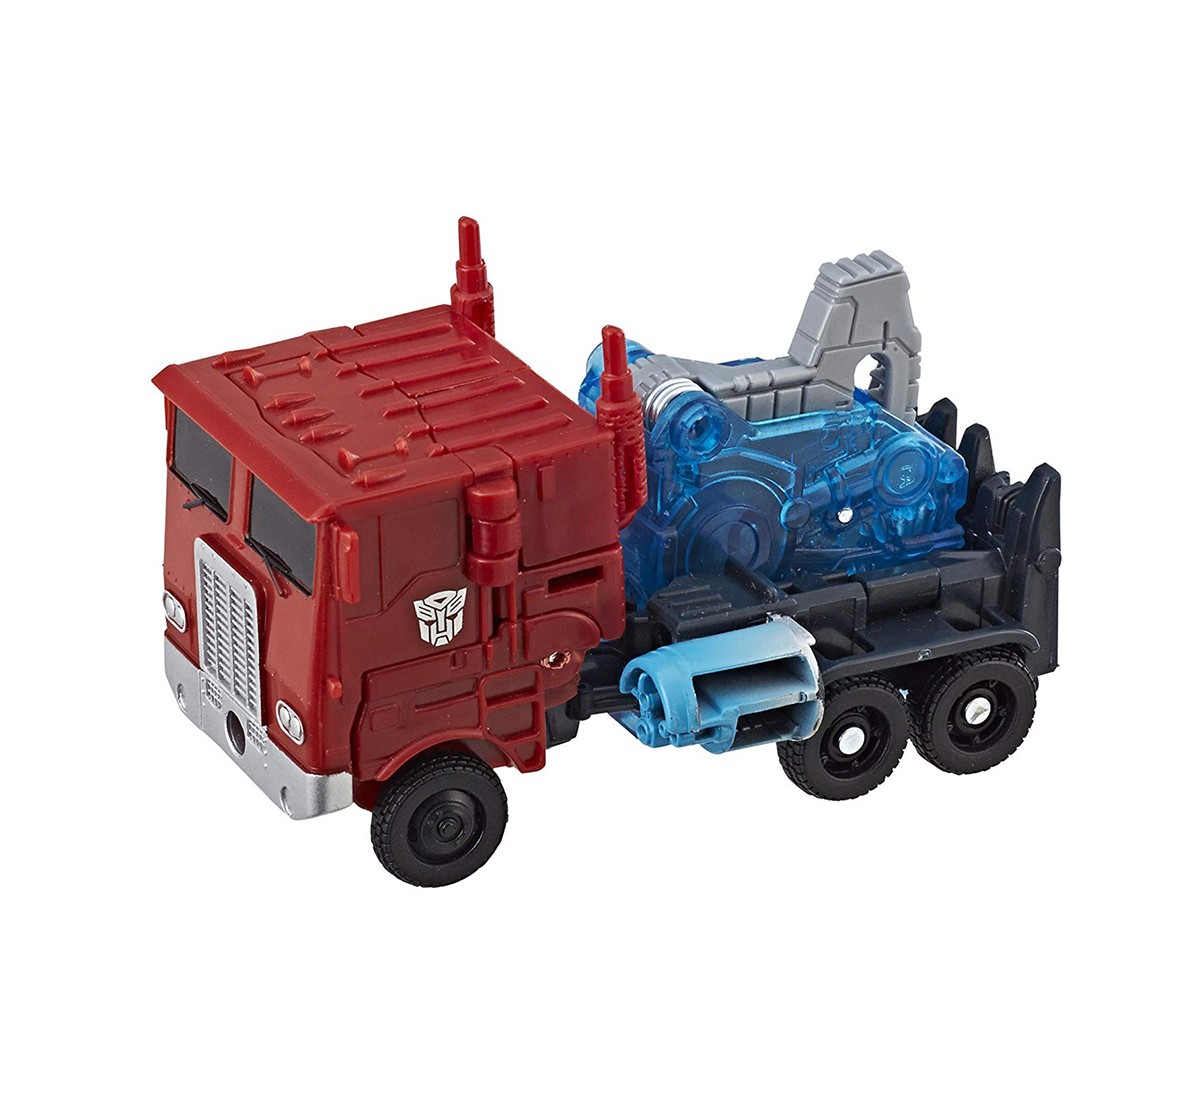 Transformers, Bumblebee Movie Toys, Energon Igniters Power Plus Series Optimus Prime Action Figures for Kids age 5Y+ 